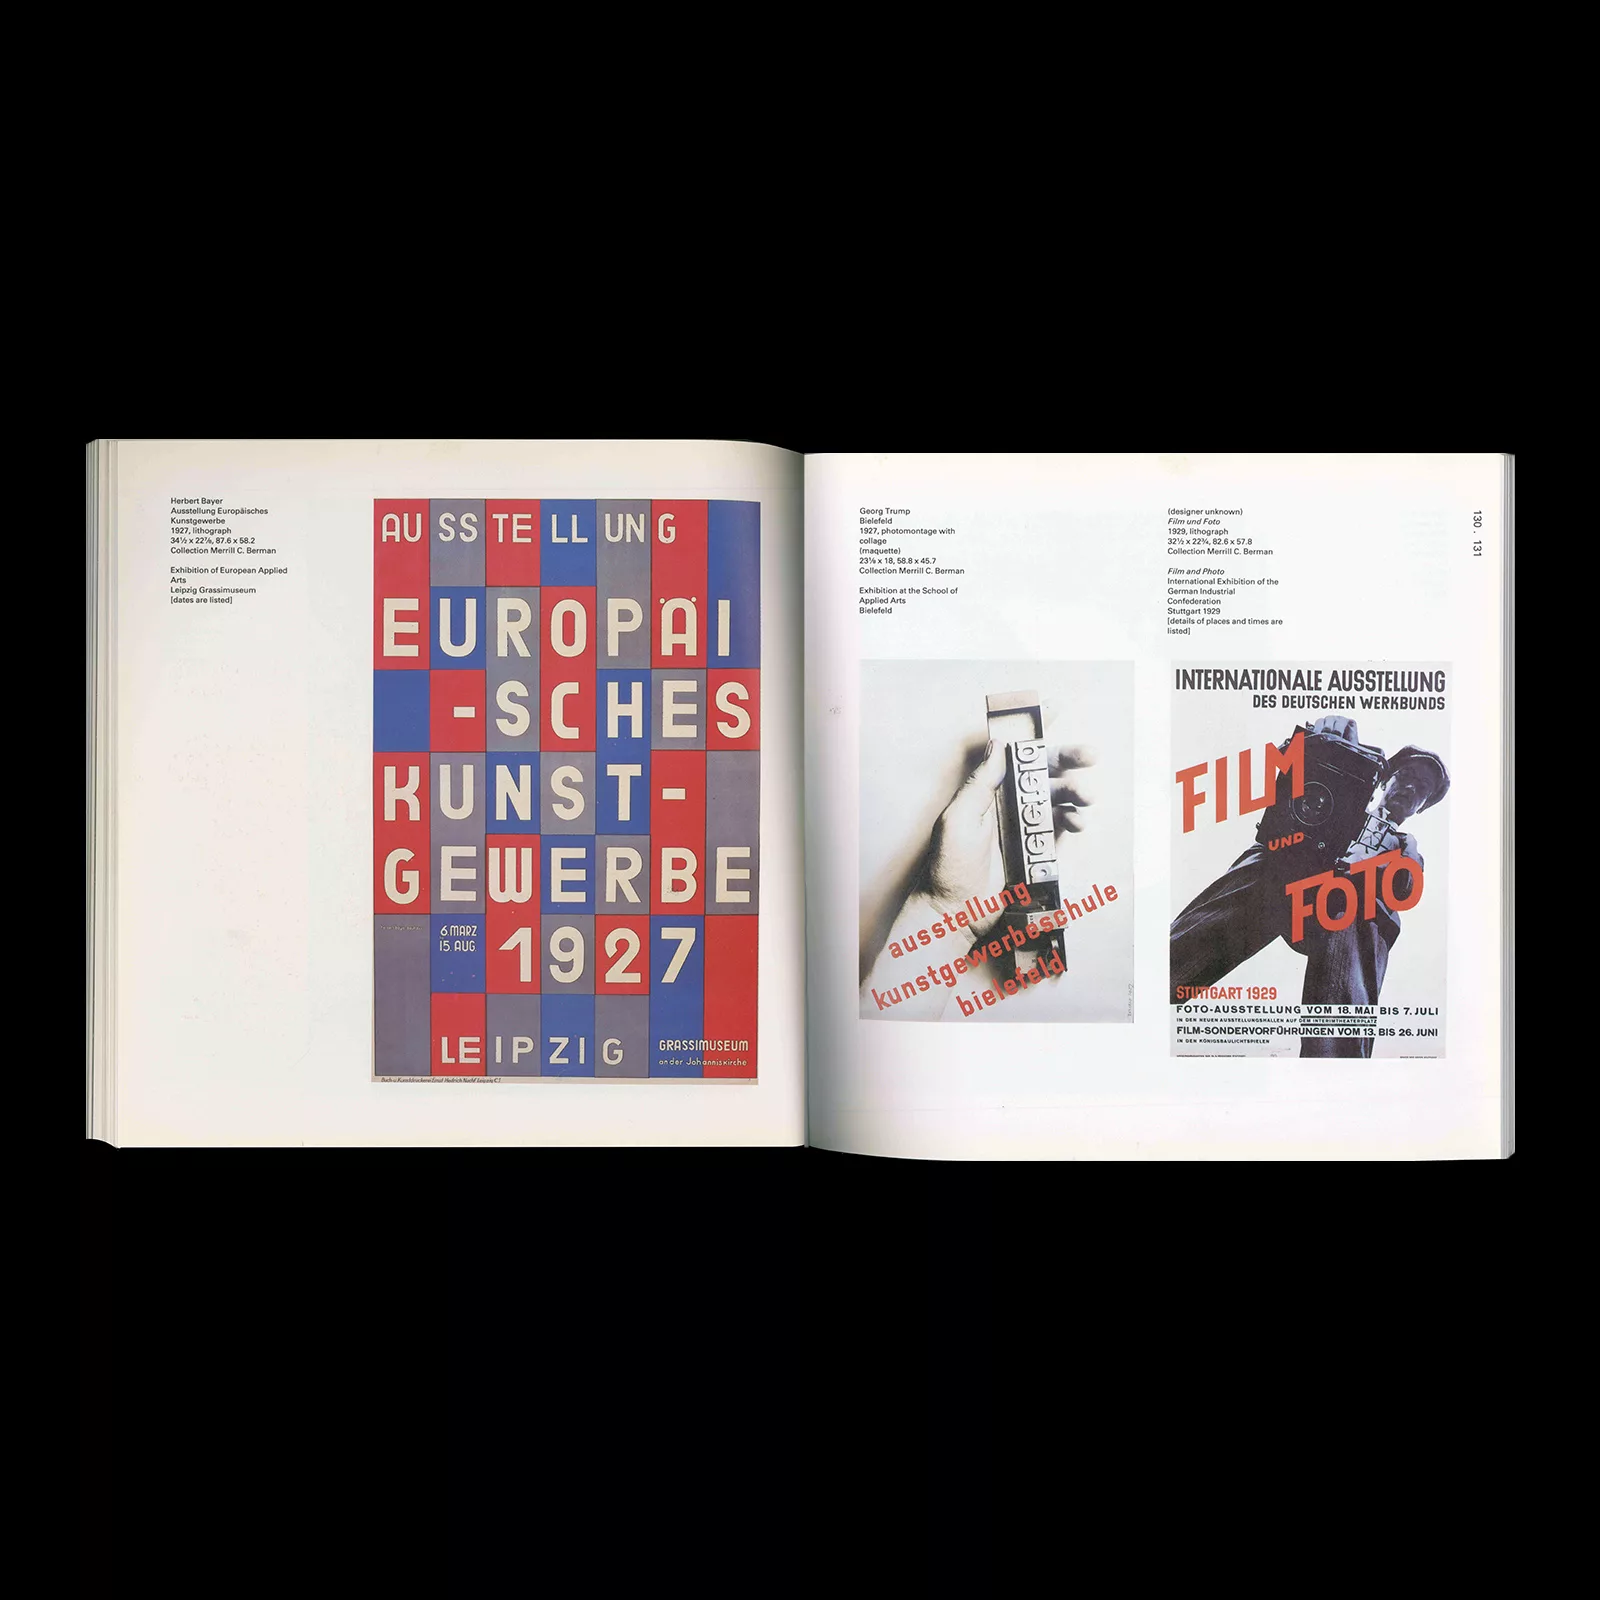 Posters, The 20th-Century Poster - Design of the Avant-Garde, Abbeville Press, 1984